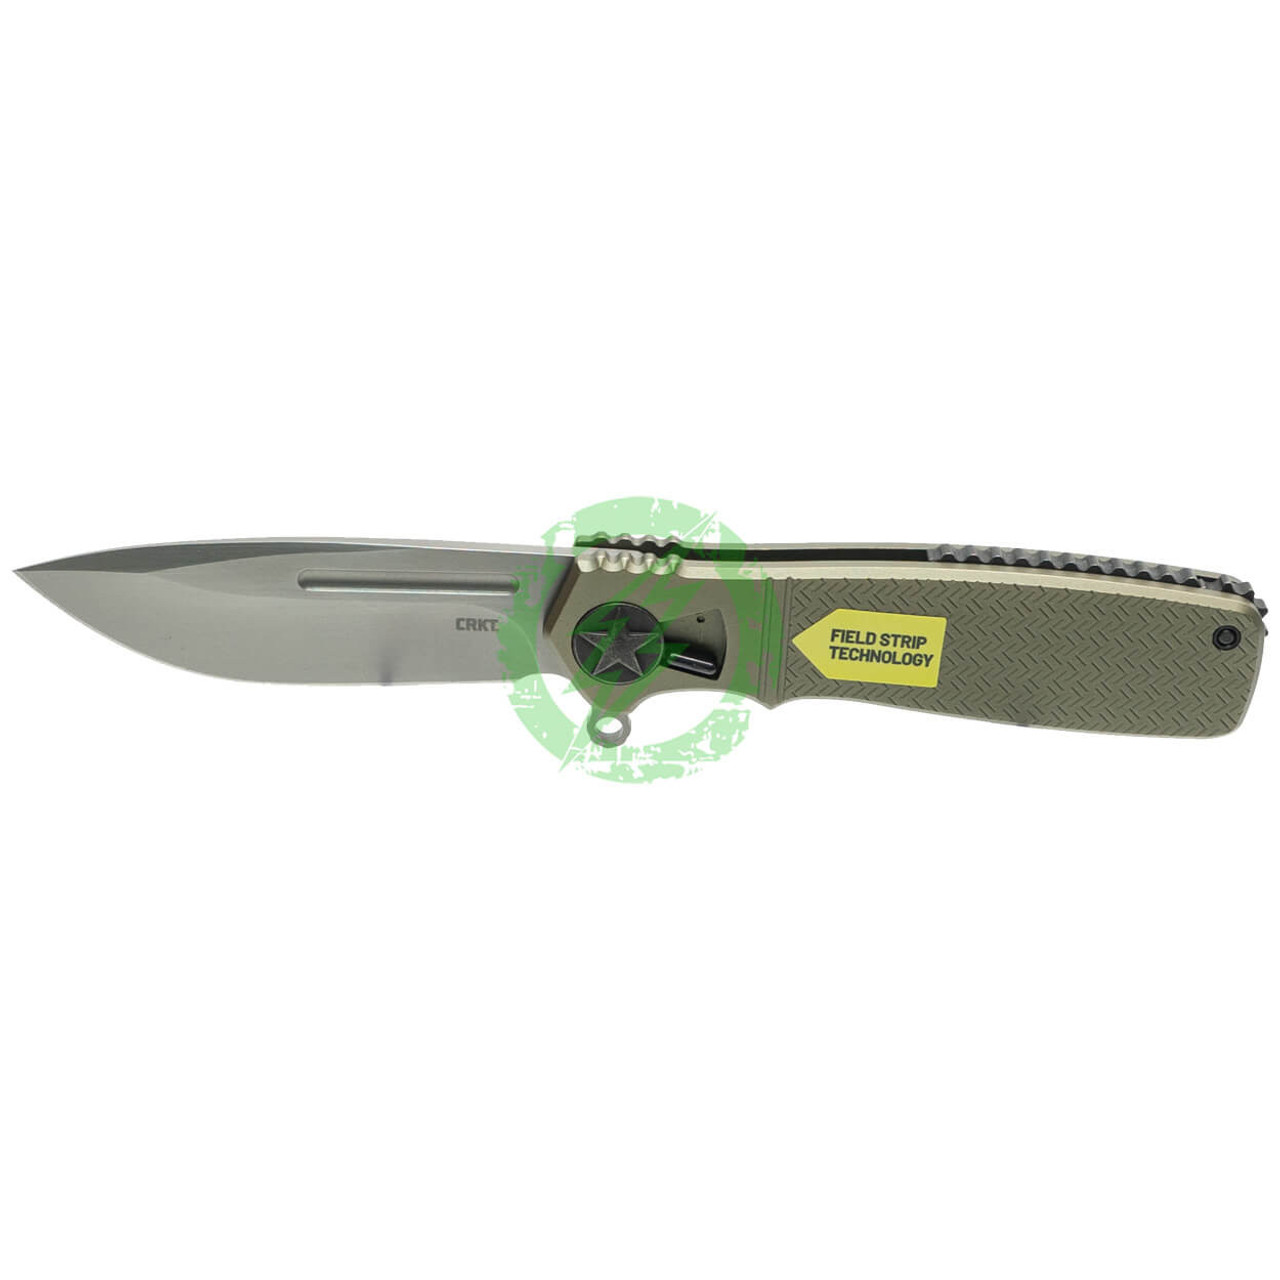 CRKT (Columbia River Knife Tool) CRKT Homefront OD Green Folding Blade Knife with AUS 8 Blade & Aluminum Handle 